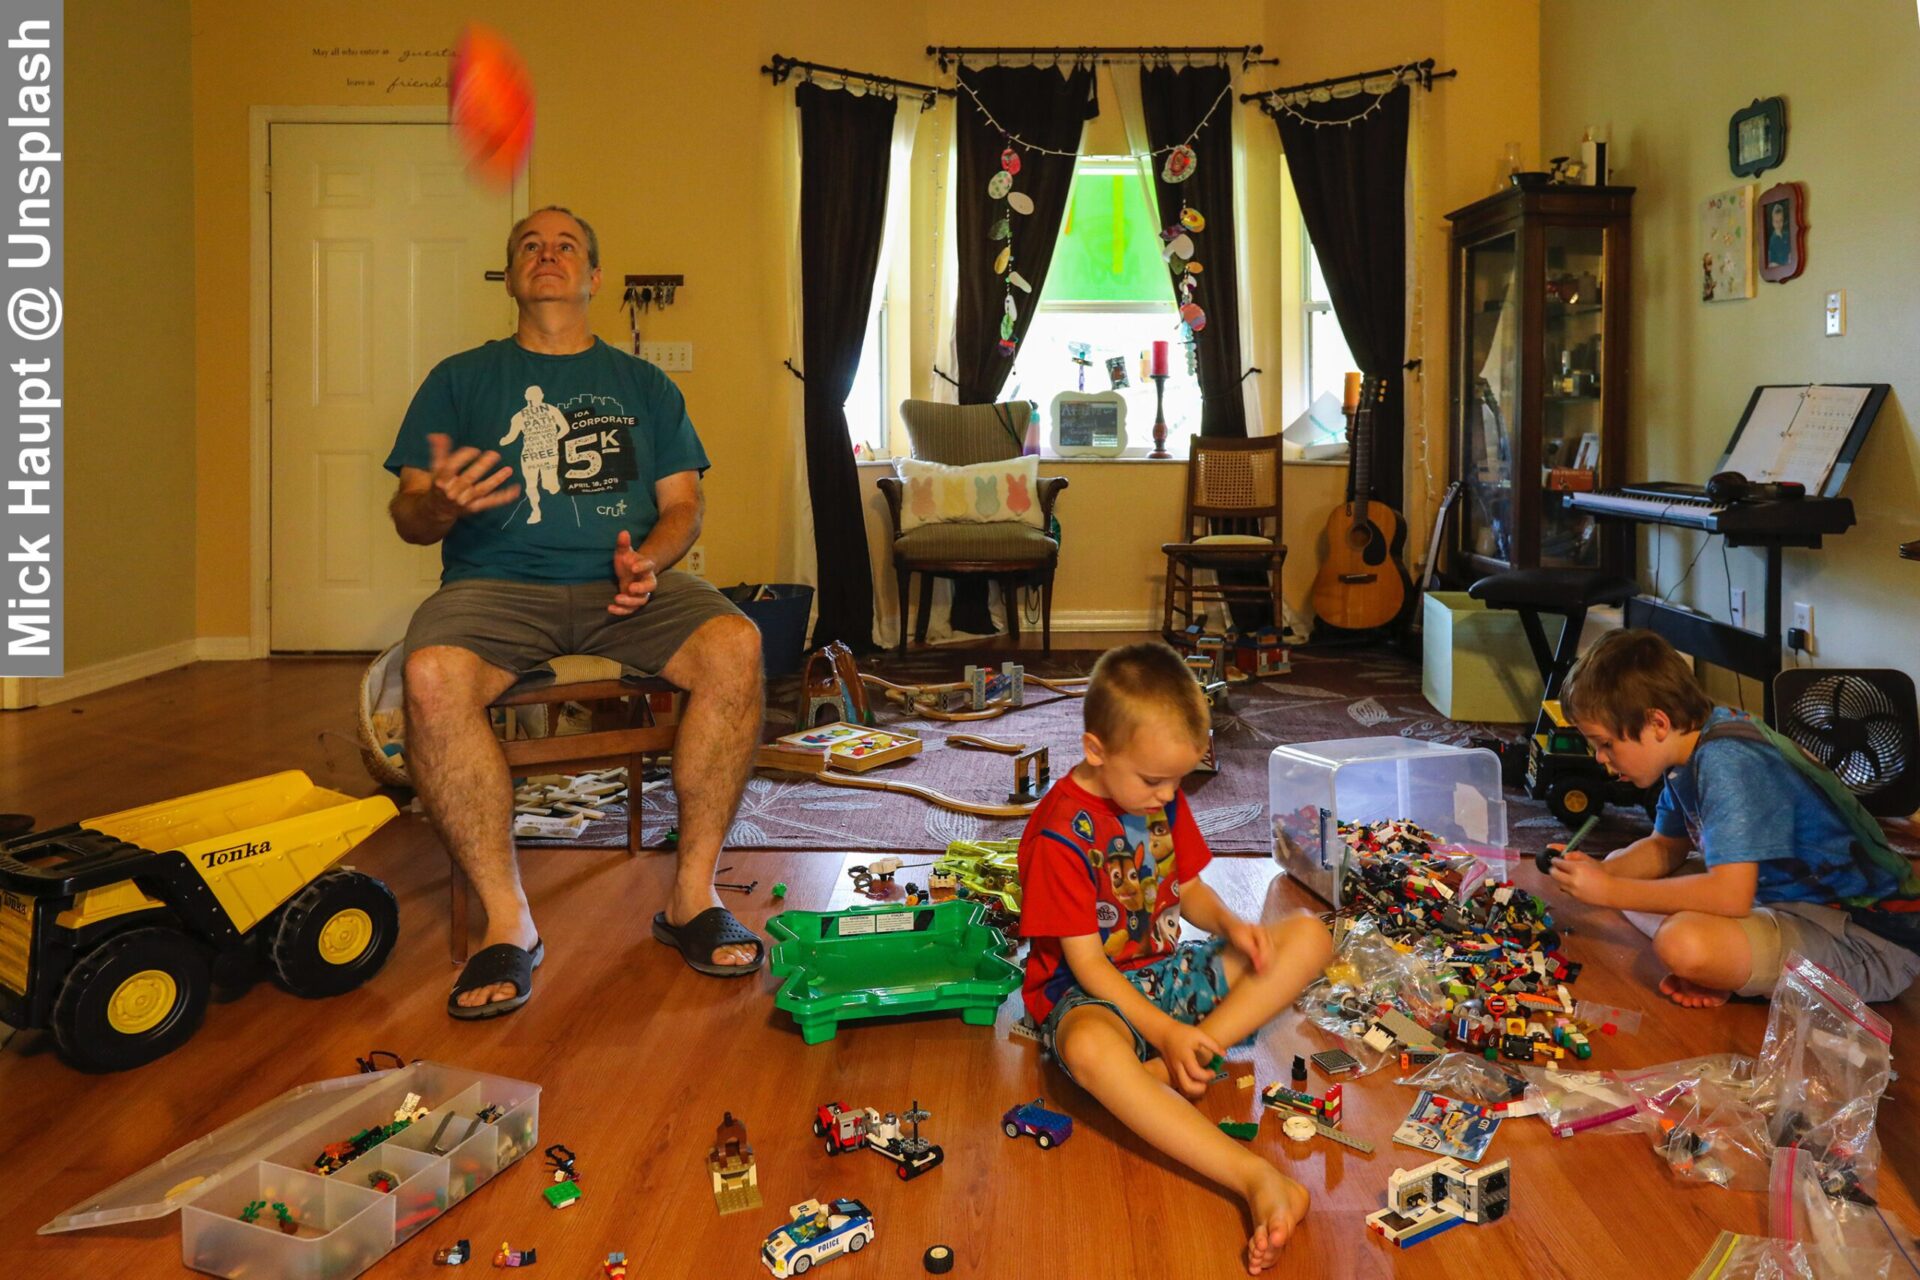 Dad Having Messy Extreme Lego Time With Kids